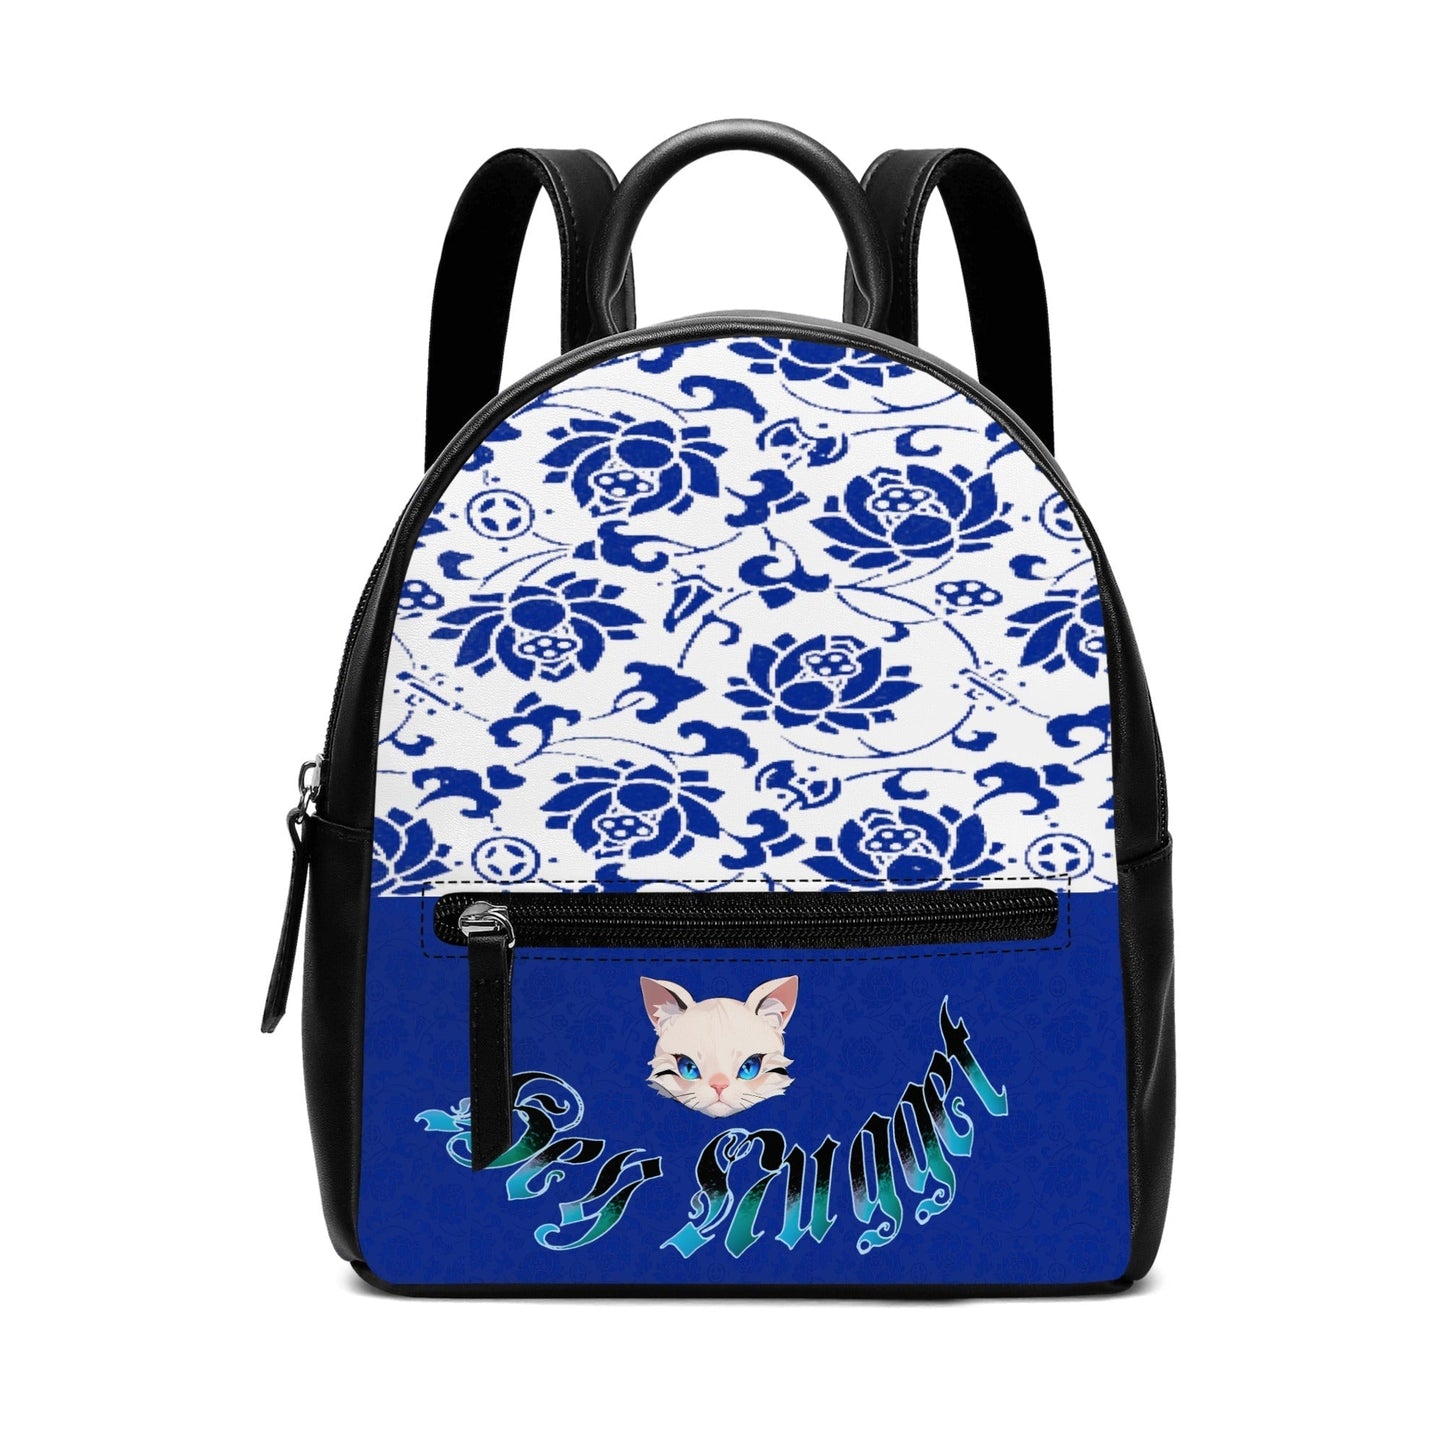 Stand out  with the  Porcelain Princess Cute PU Backpack  available at Hey Nugget. Grab yours today!